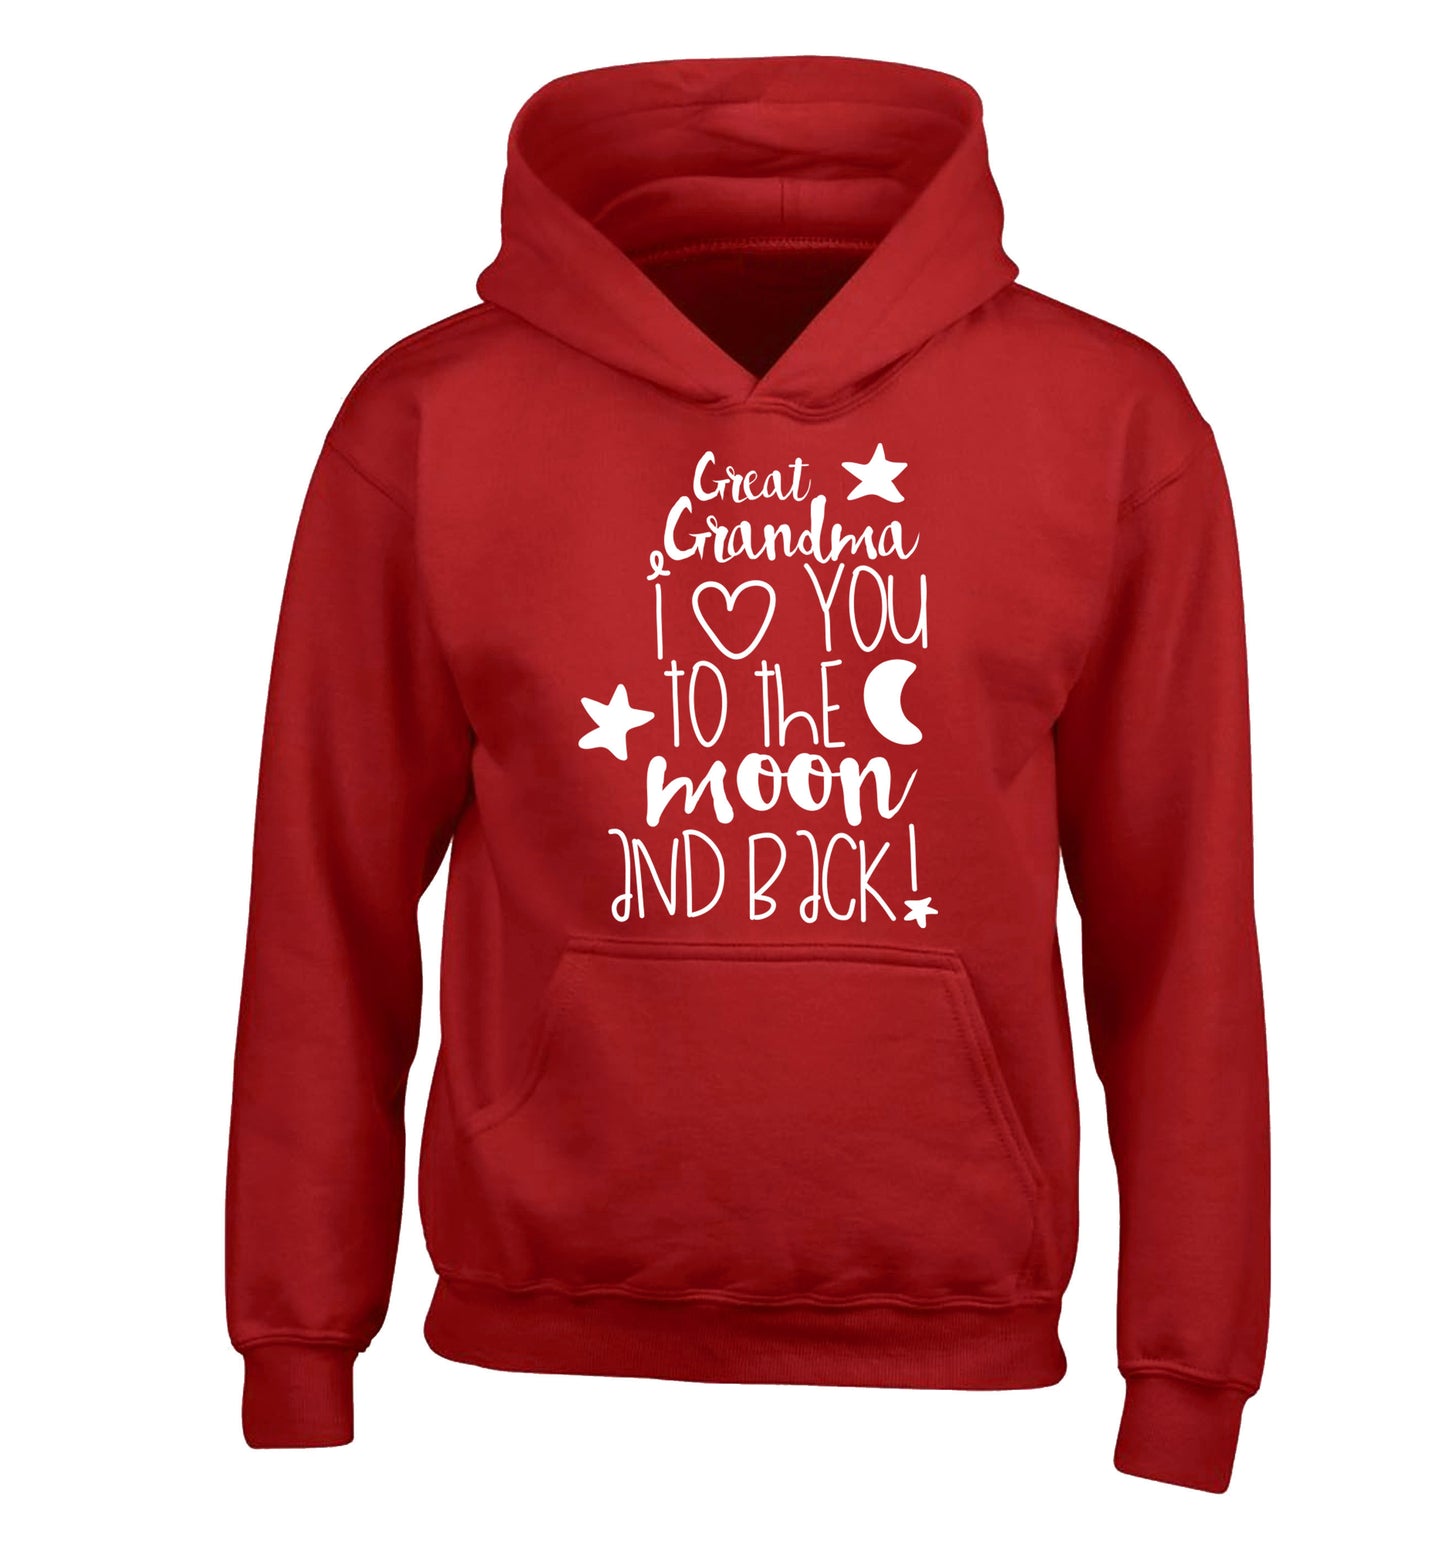 Great Grandma I love you to the moon and back children's red hoodie 12-14 Years